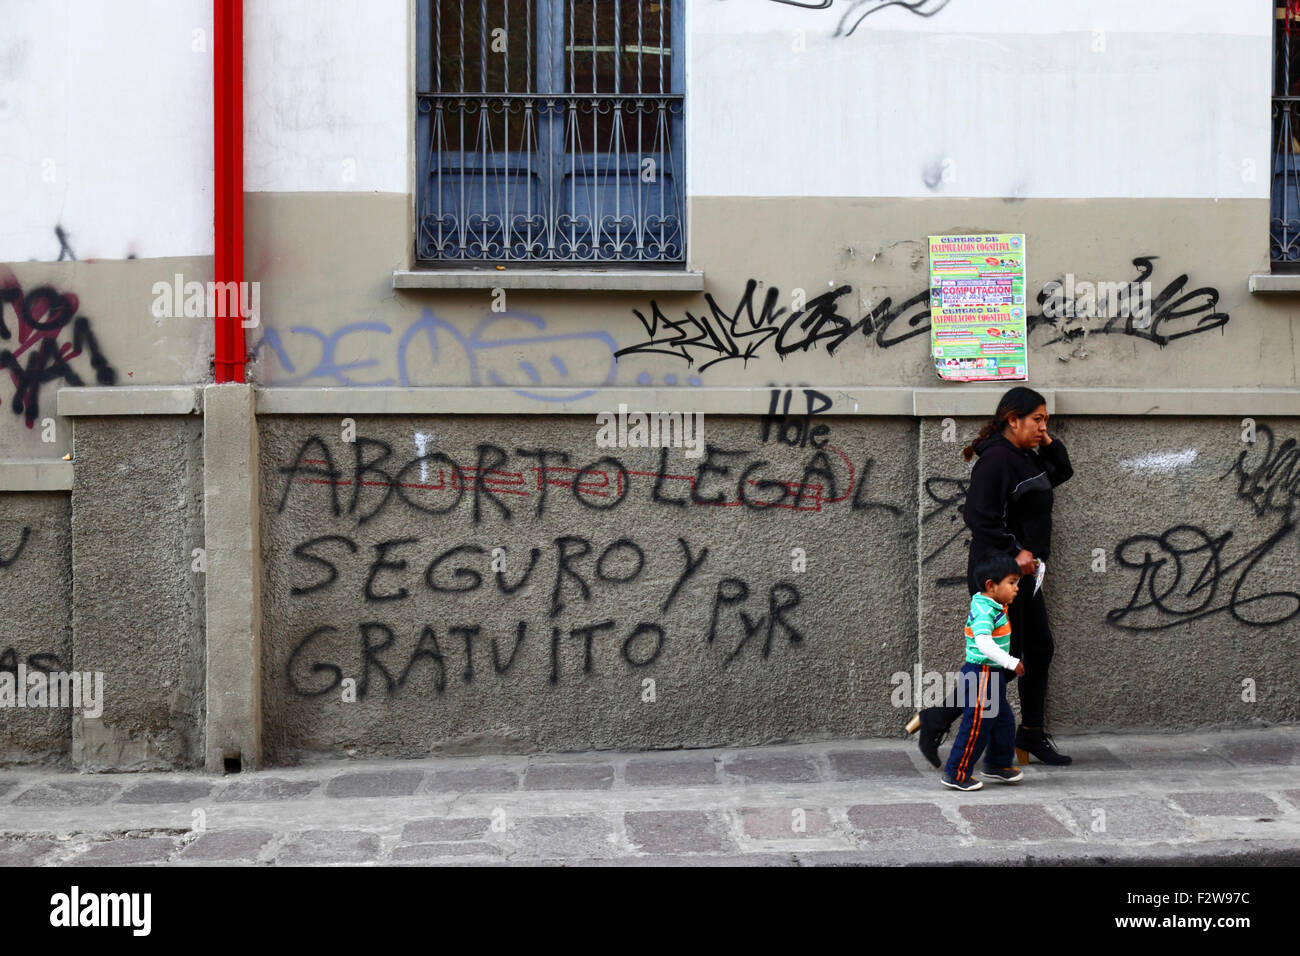 Graffiti on wall demanding the right to safe, legal, free abortion for women, La Paz, Bolivia Stock Photo